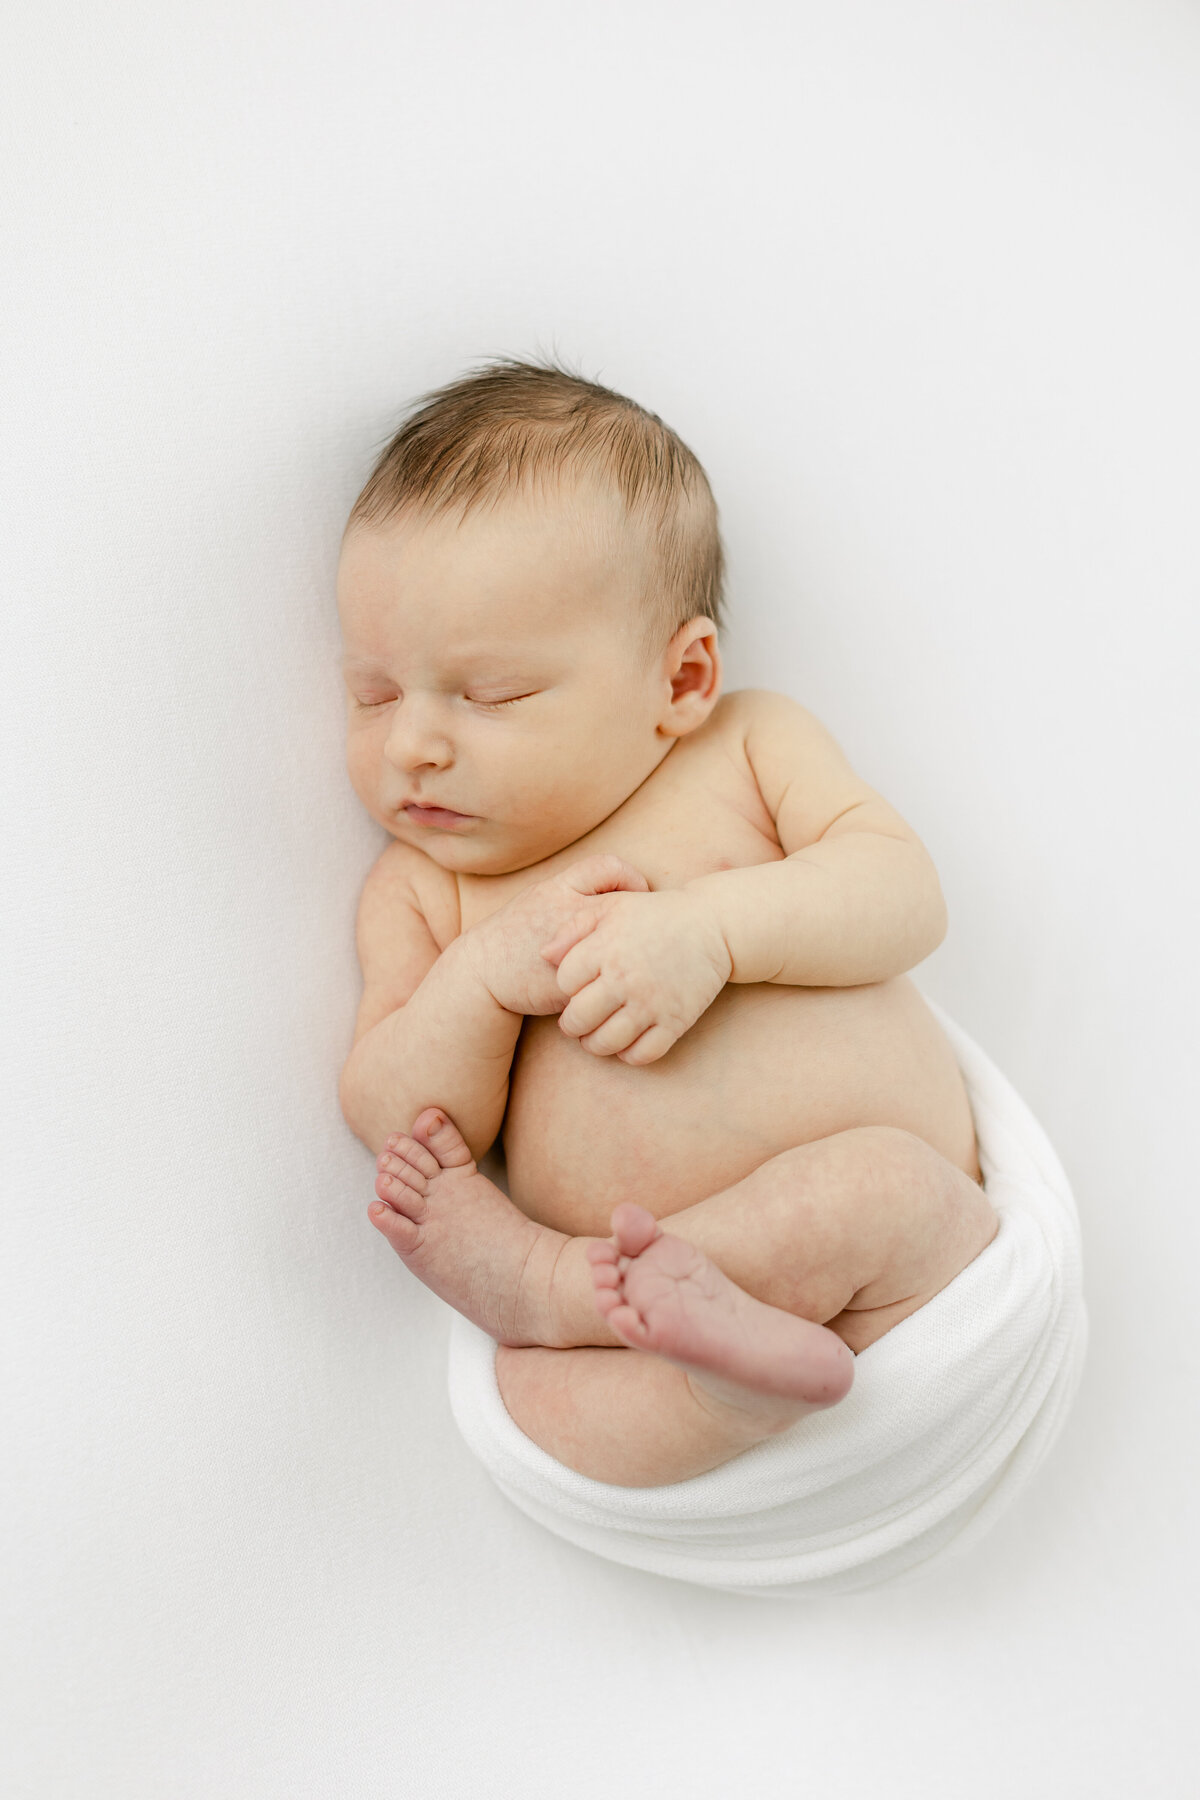 infant baby delicately swaddled in a white blanket showing his arms, belly and legs photographed by Philadelphia Newborn Photographer Tara Federico